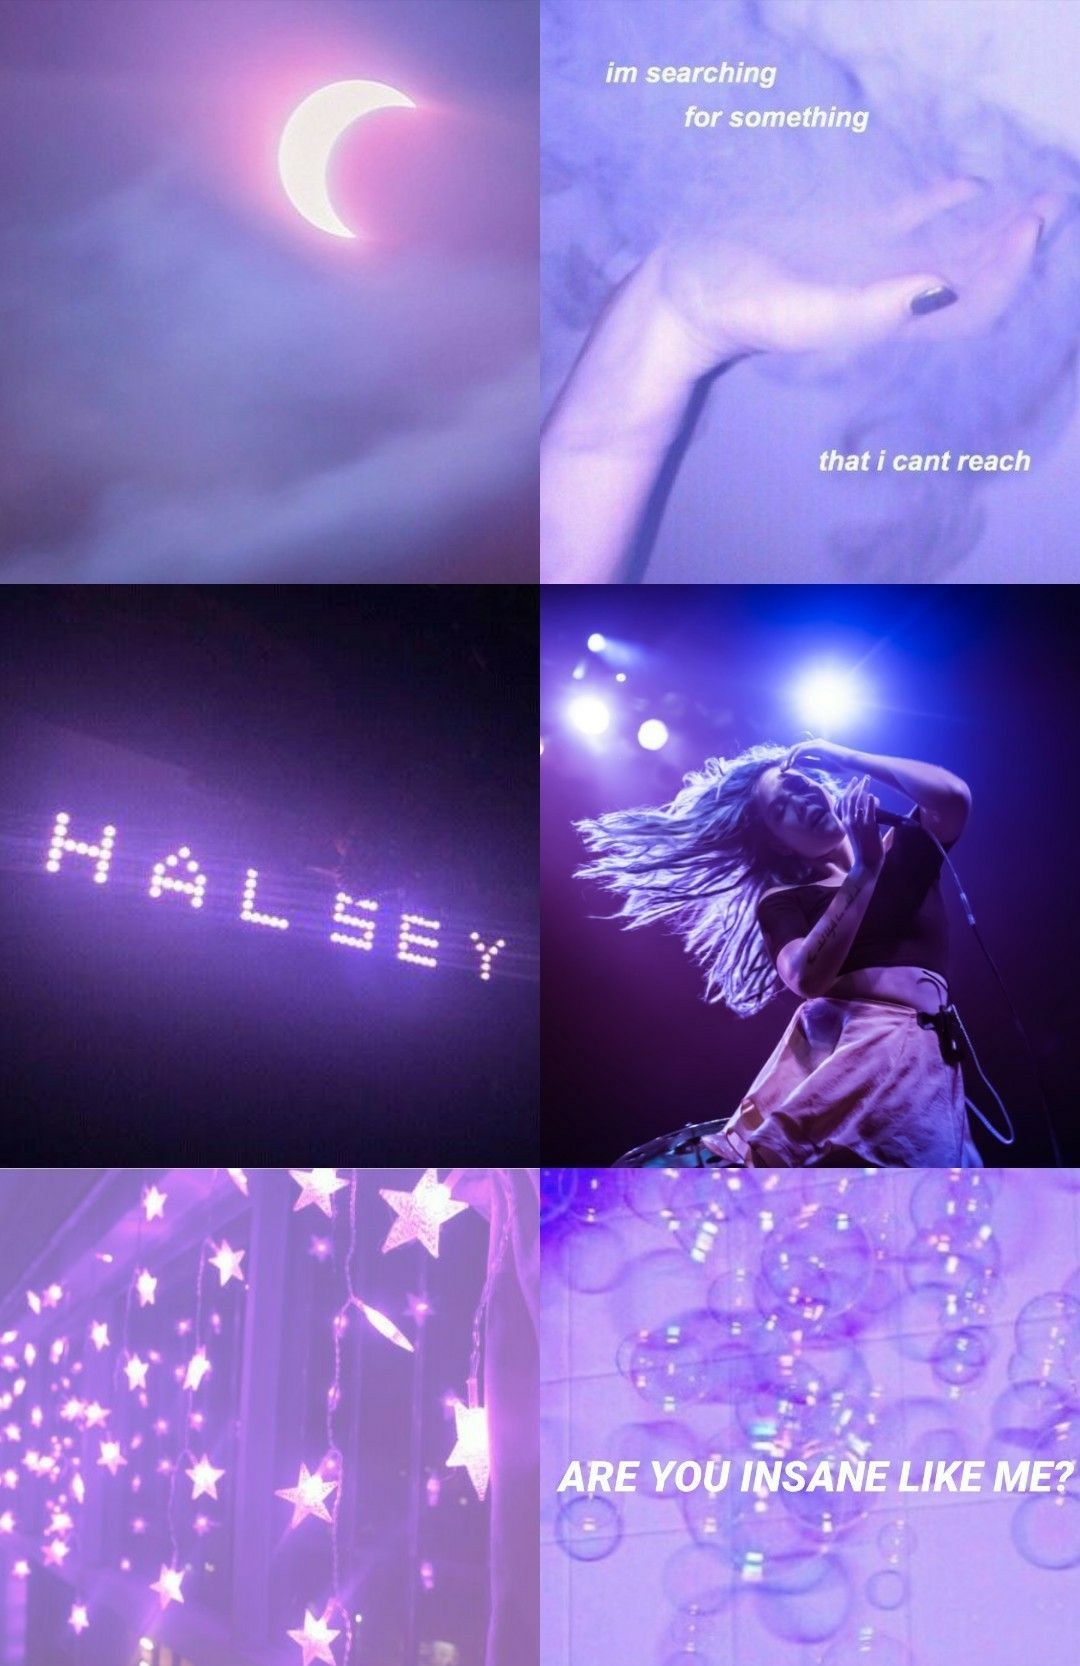 Ghost by Halsey; Gasoline by Halsey. Halsey lyrics, Halsey lyrics gasoline, Halsey